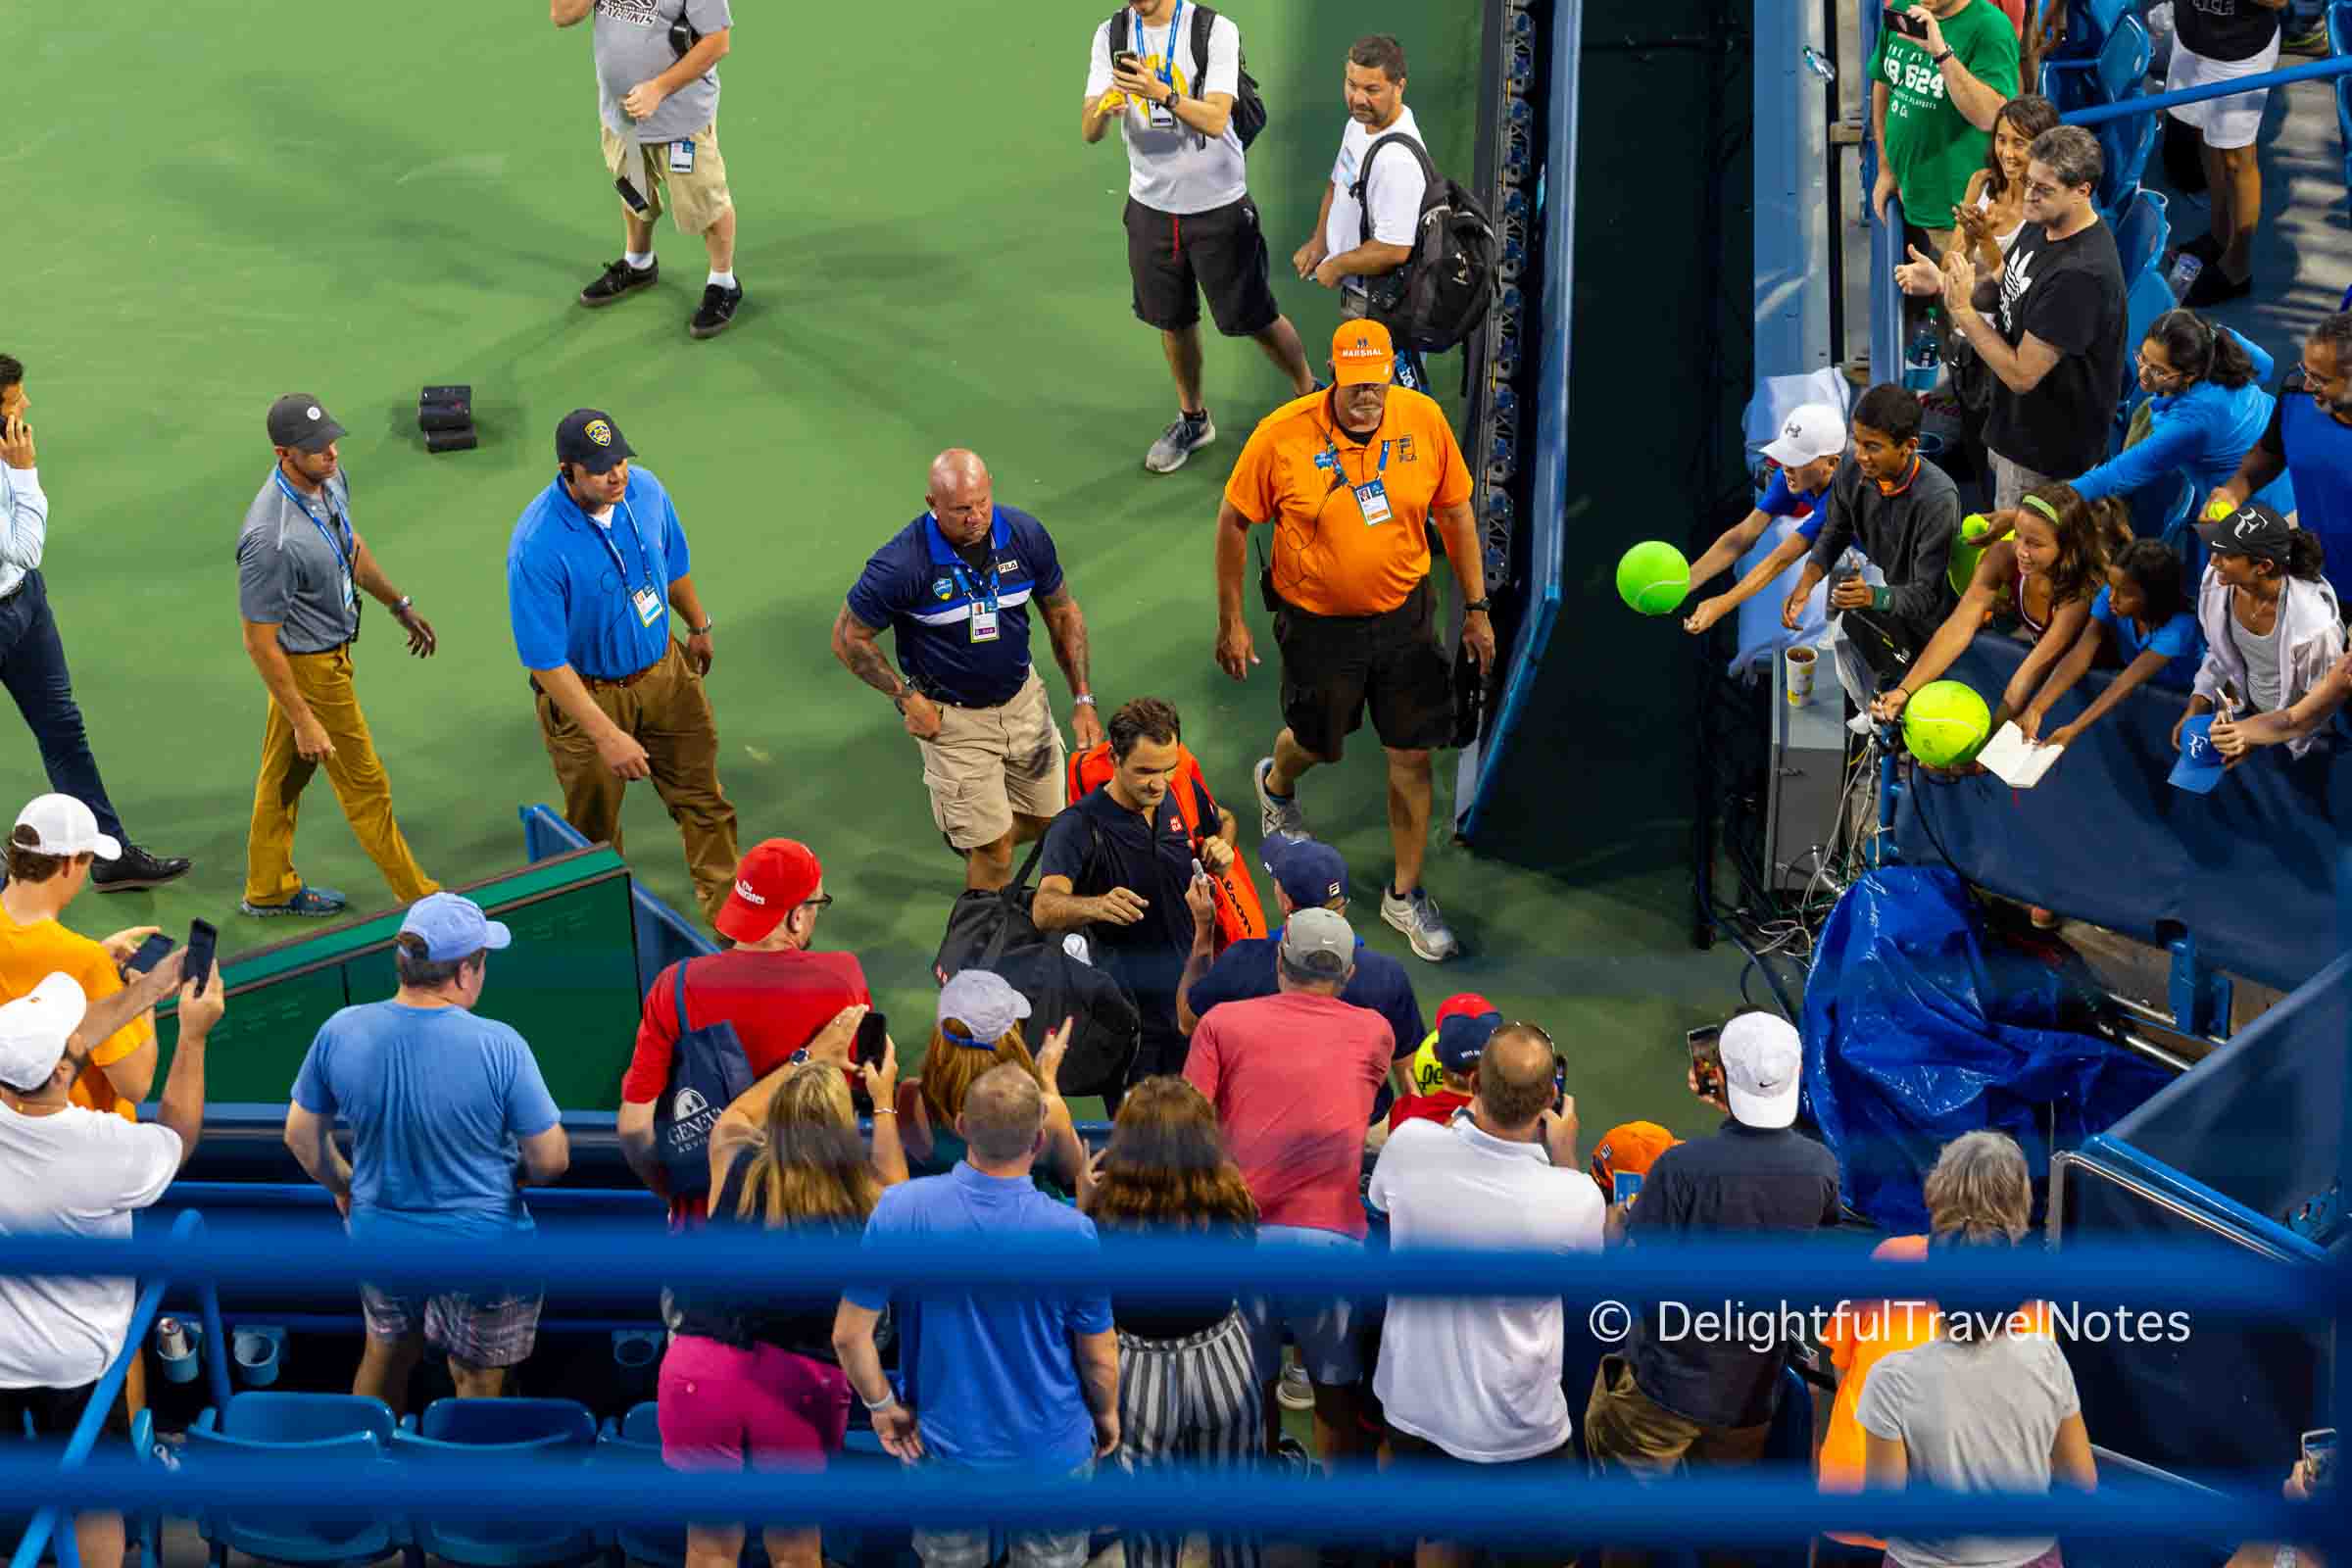 Federer signing for fans after his match in the Center Court at Western & Southern Open 2018.